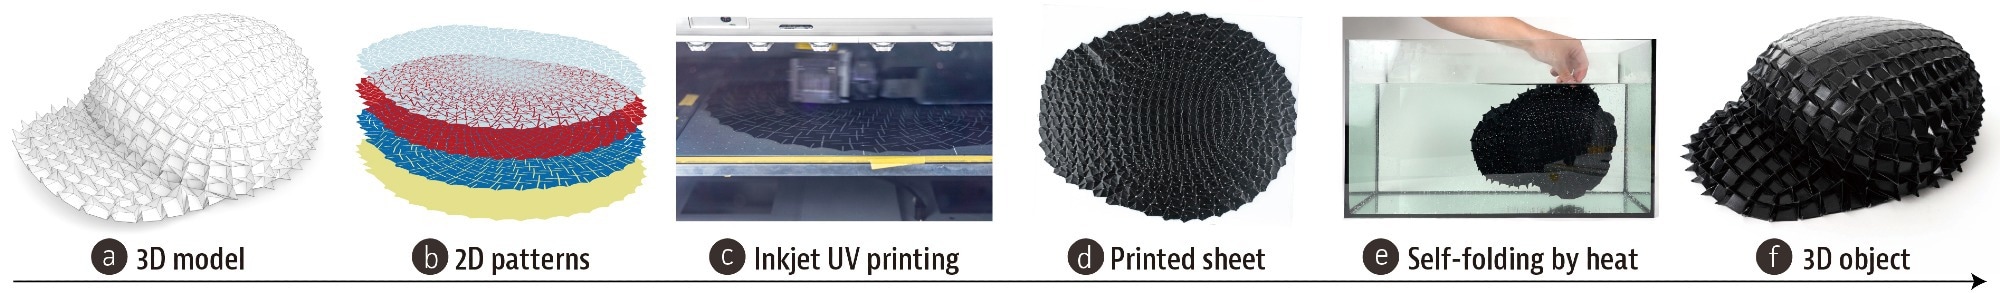 Semi-Folding Origami Sheets Deliver New Dimension for 3D Printing